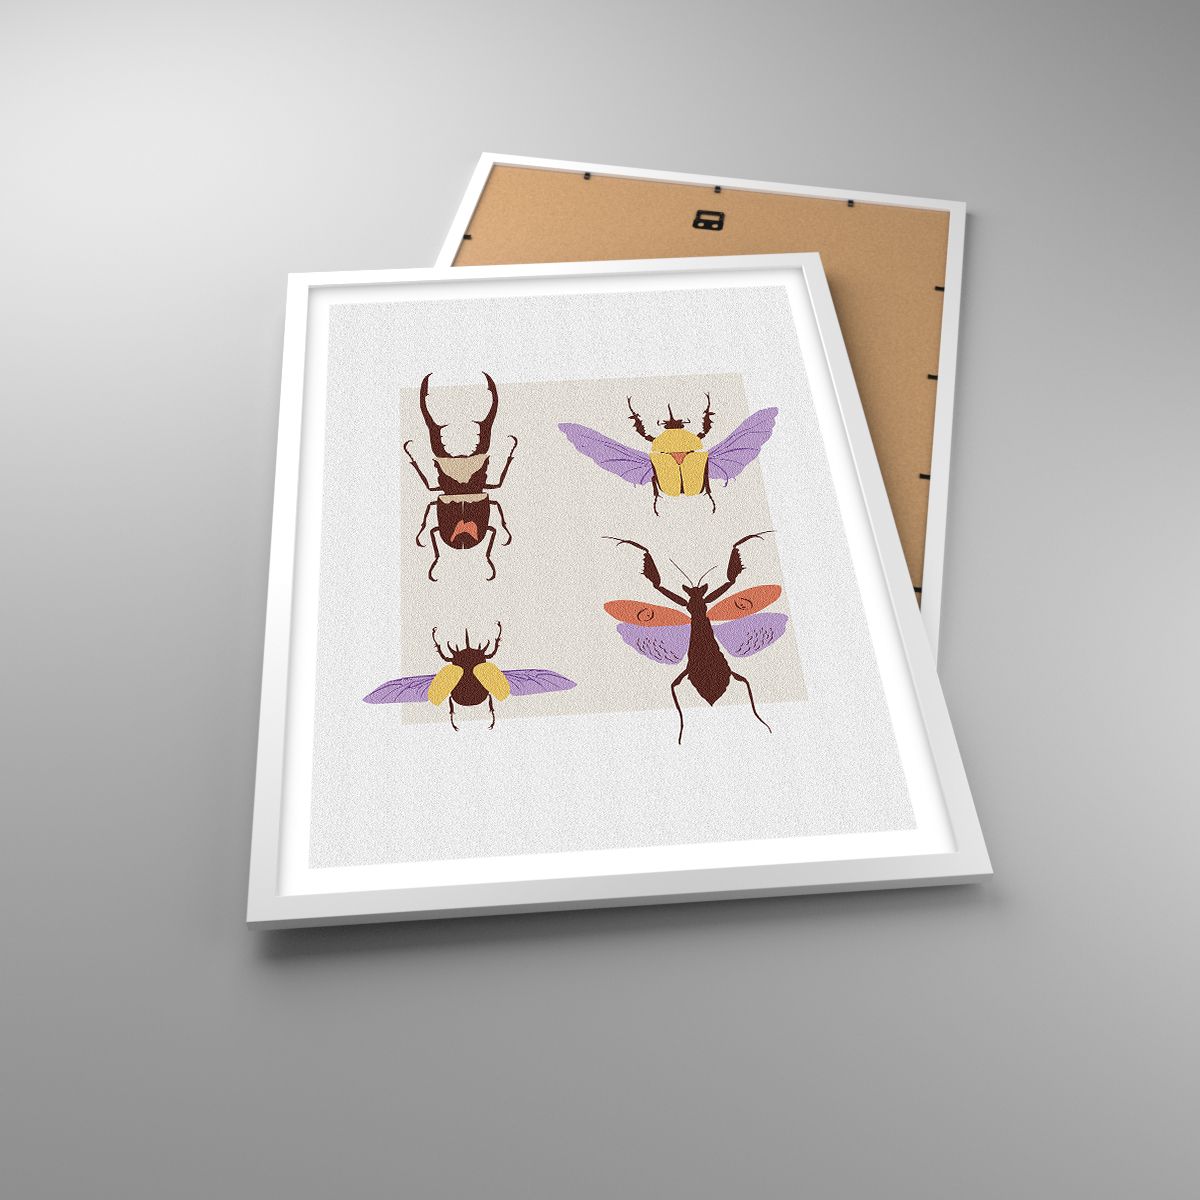 Poster Insecten, Poster Minimalistisch, Poster Kevers